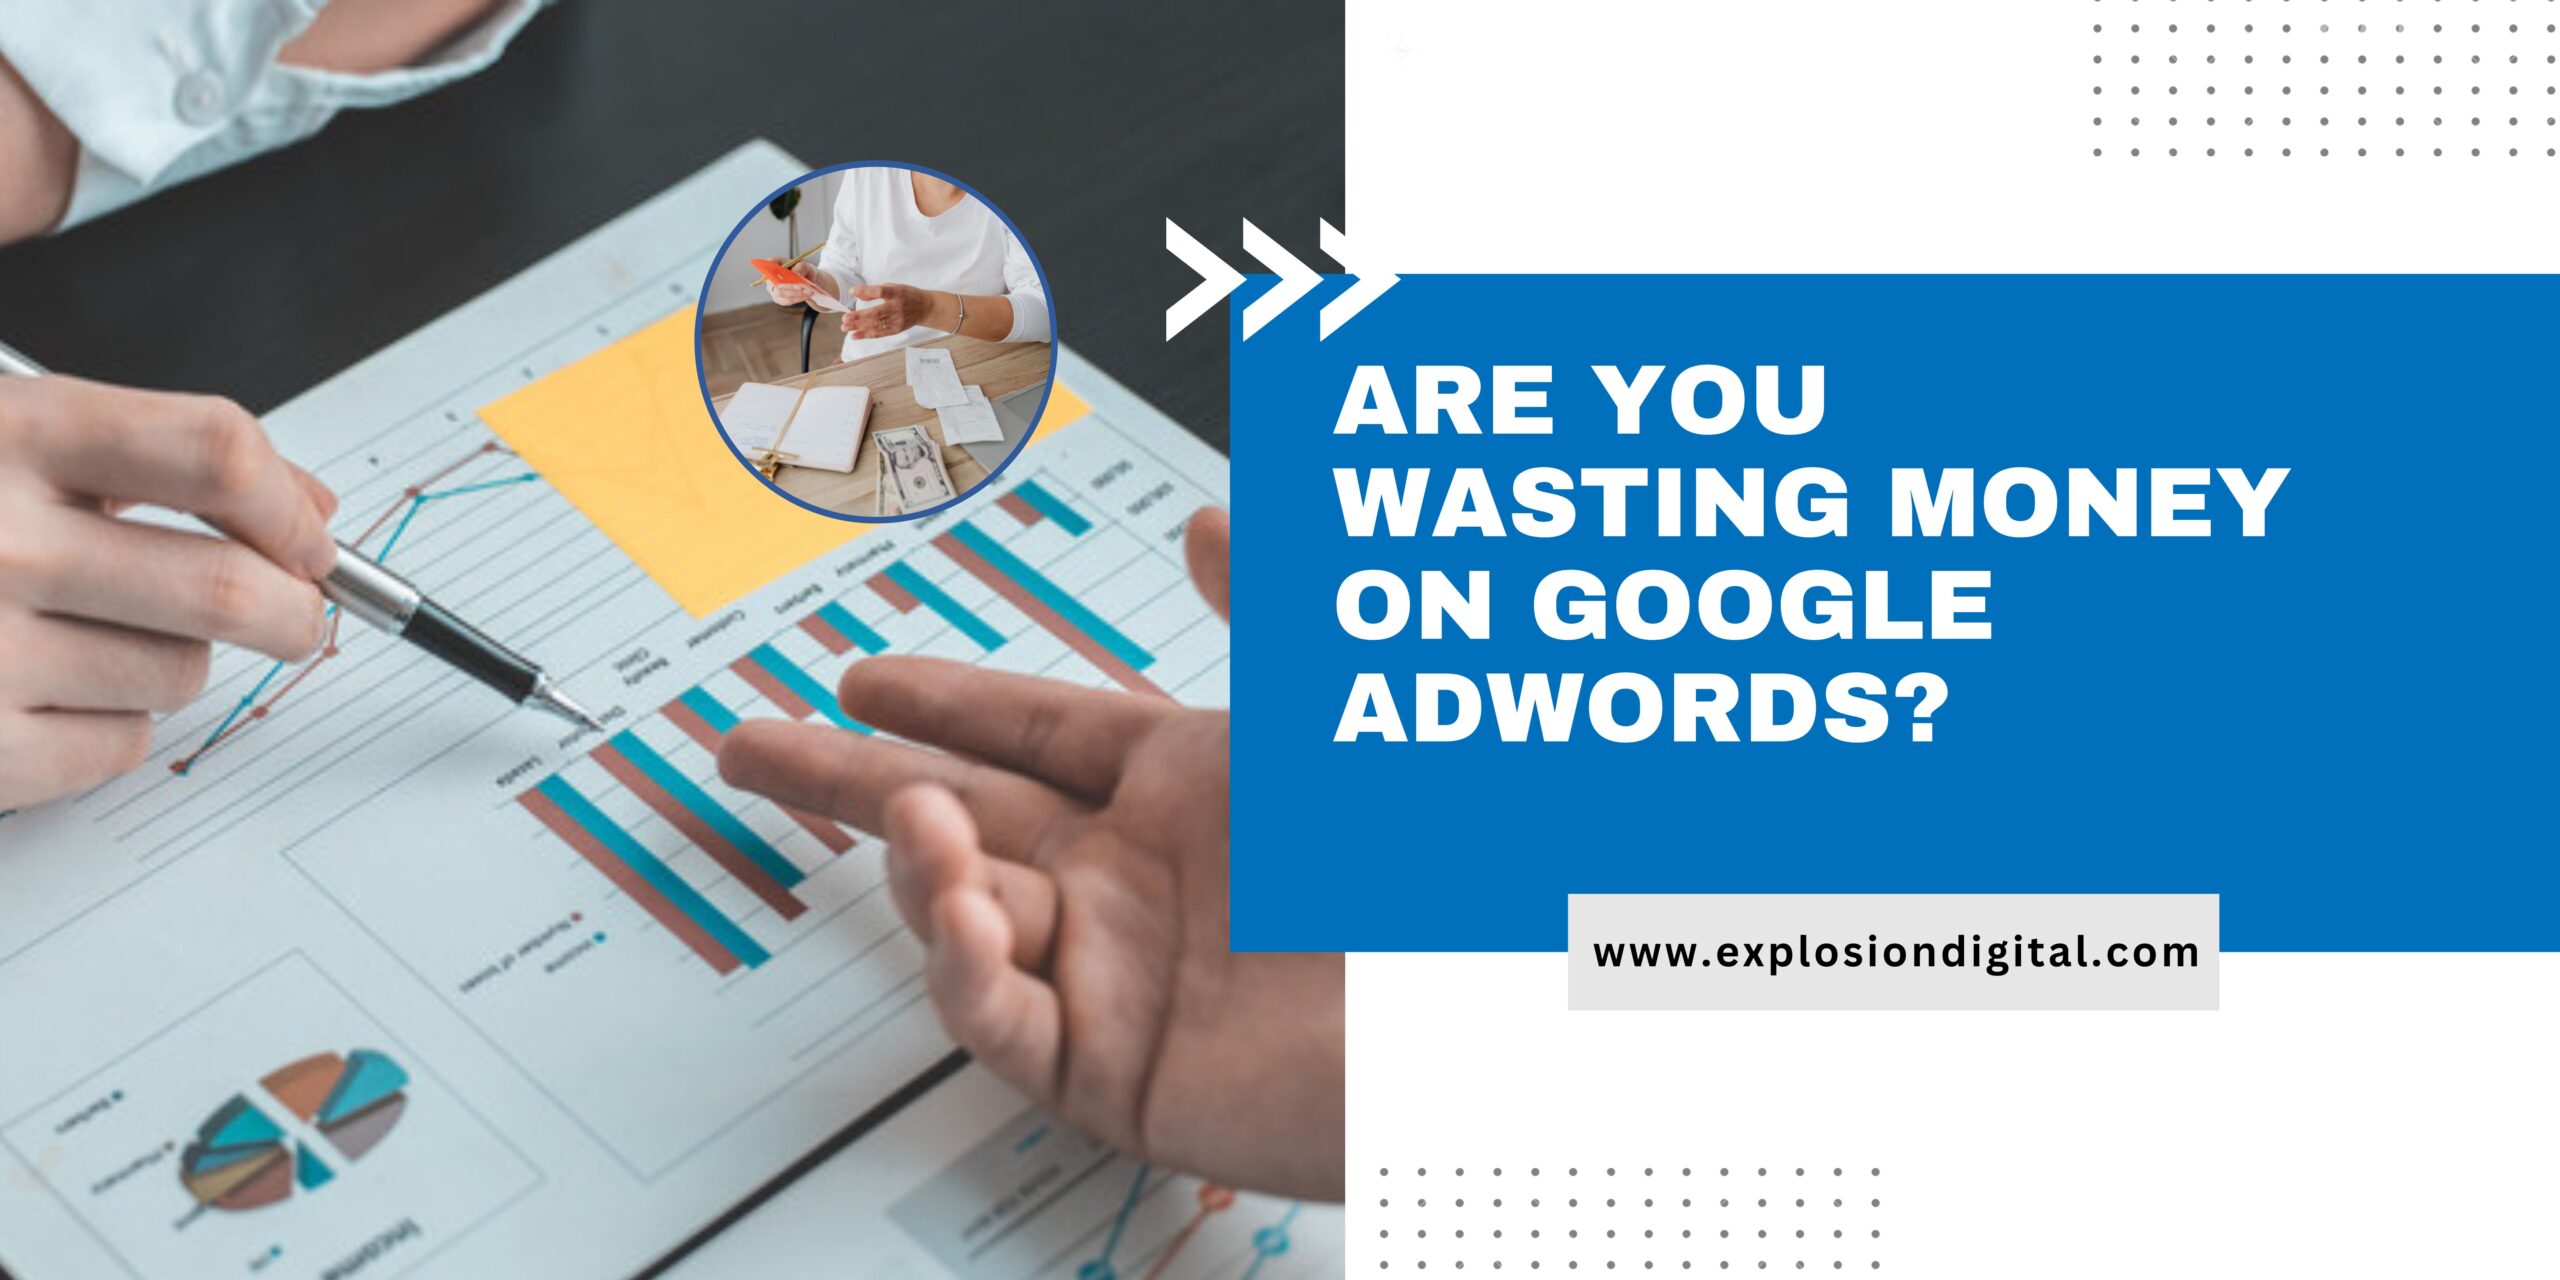 Are You Wasting Money on Google Adwords?